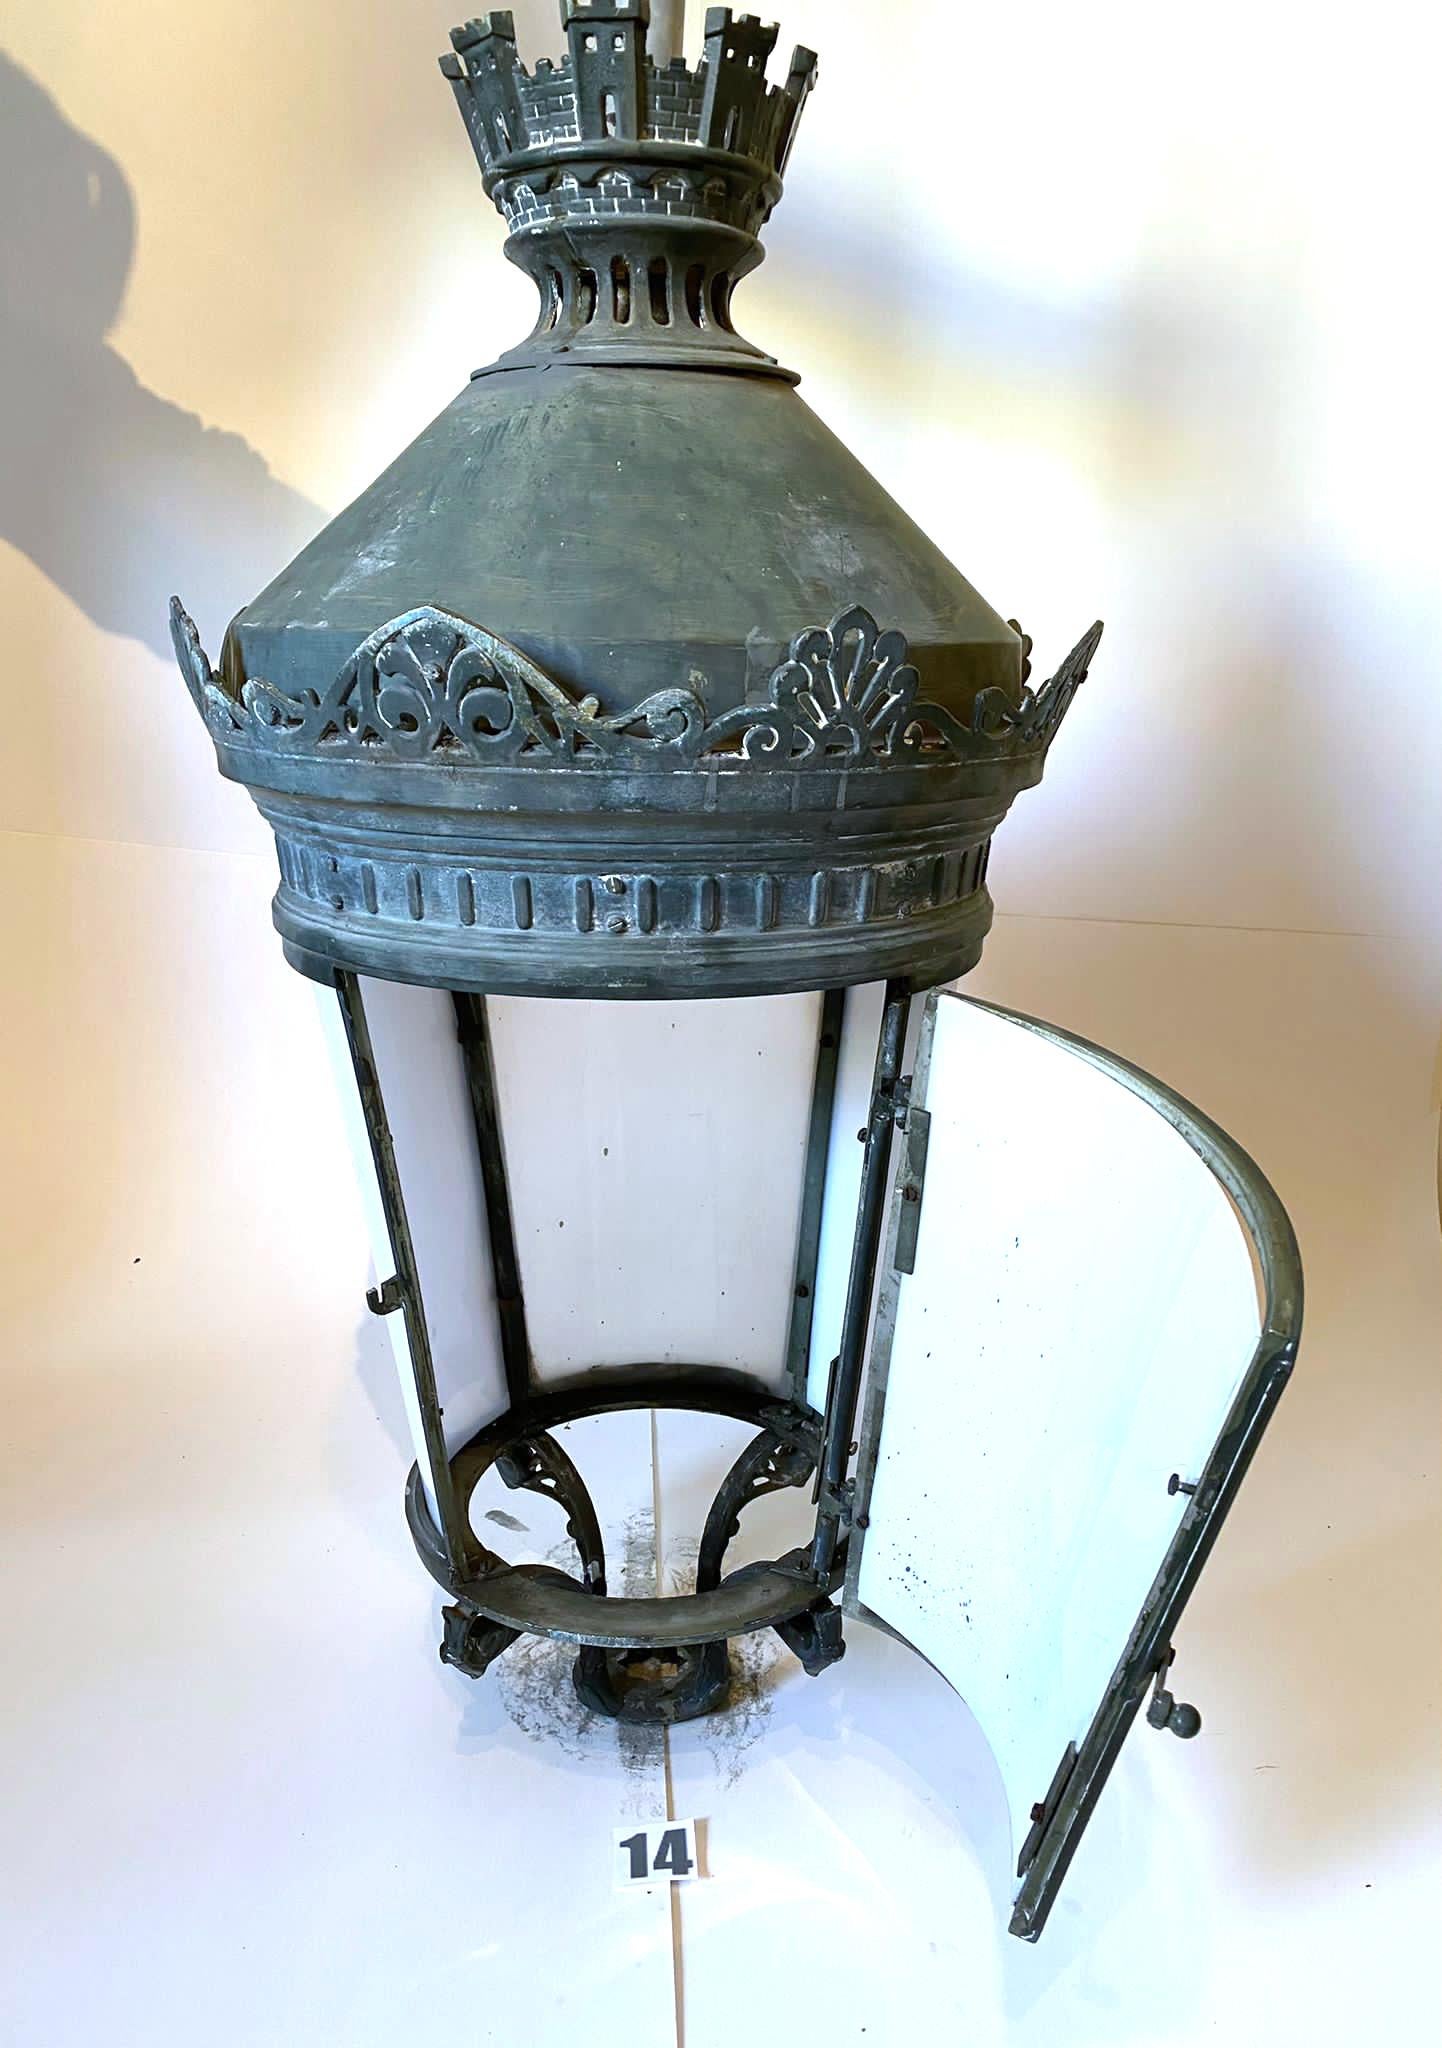 I'm offering a total of 29 Palatial Lanterns on my 1st Dibs store. 
 
****The Lantern pictured in this listing is LANTERN #14, the oldest lantern of the 29 lanterns I am offering, and my restorer chose it as a single lantern that can be purchased